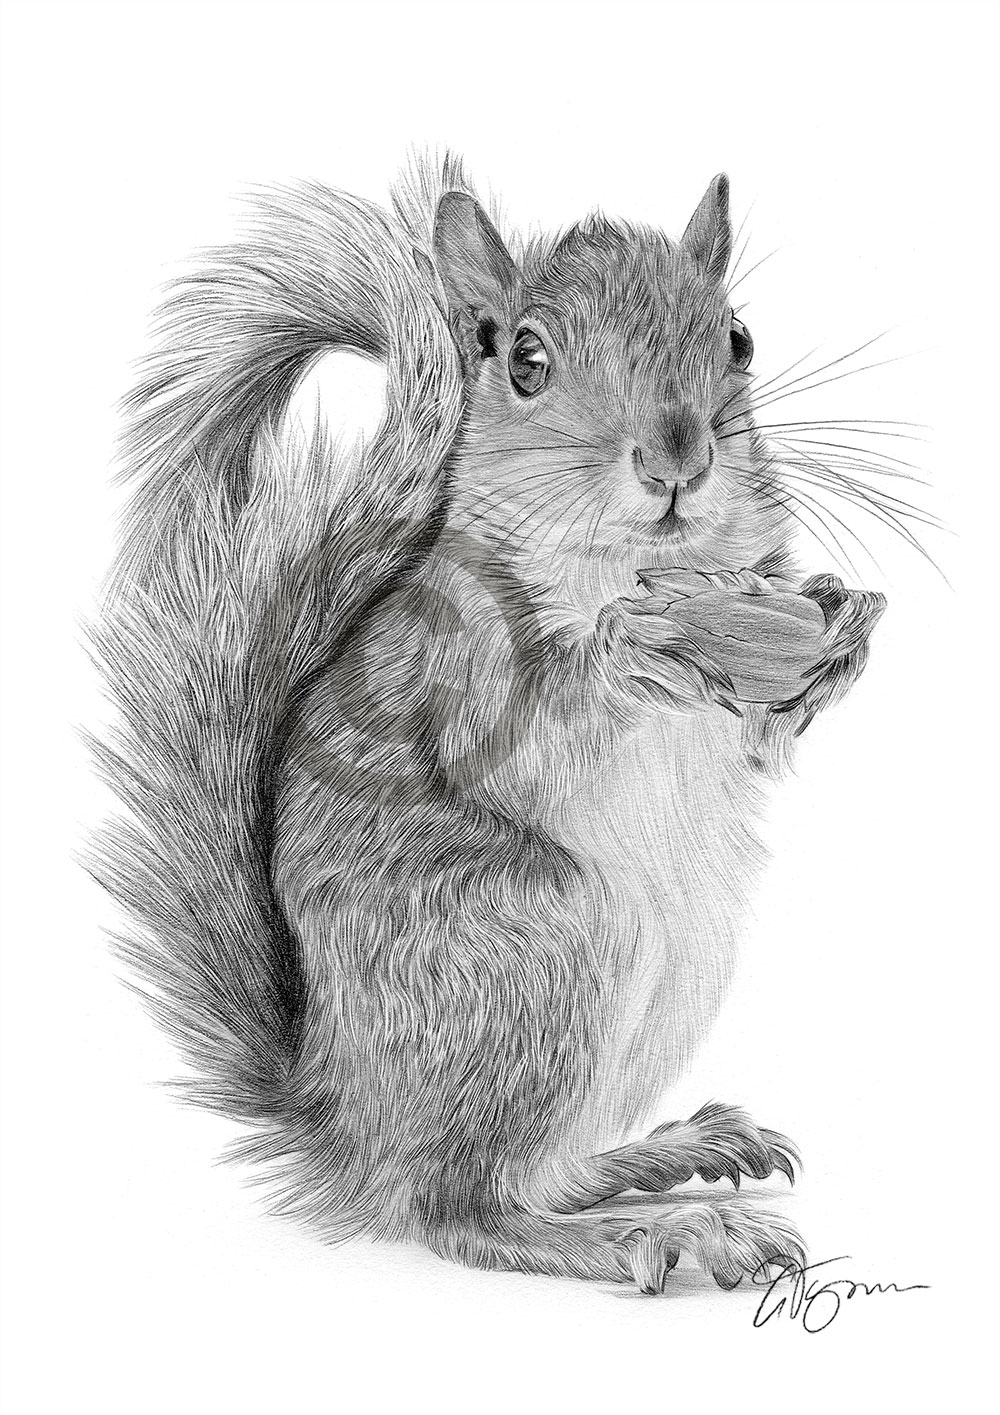 Pencil drawing of a red squirrel by artist Gary Tymon